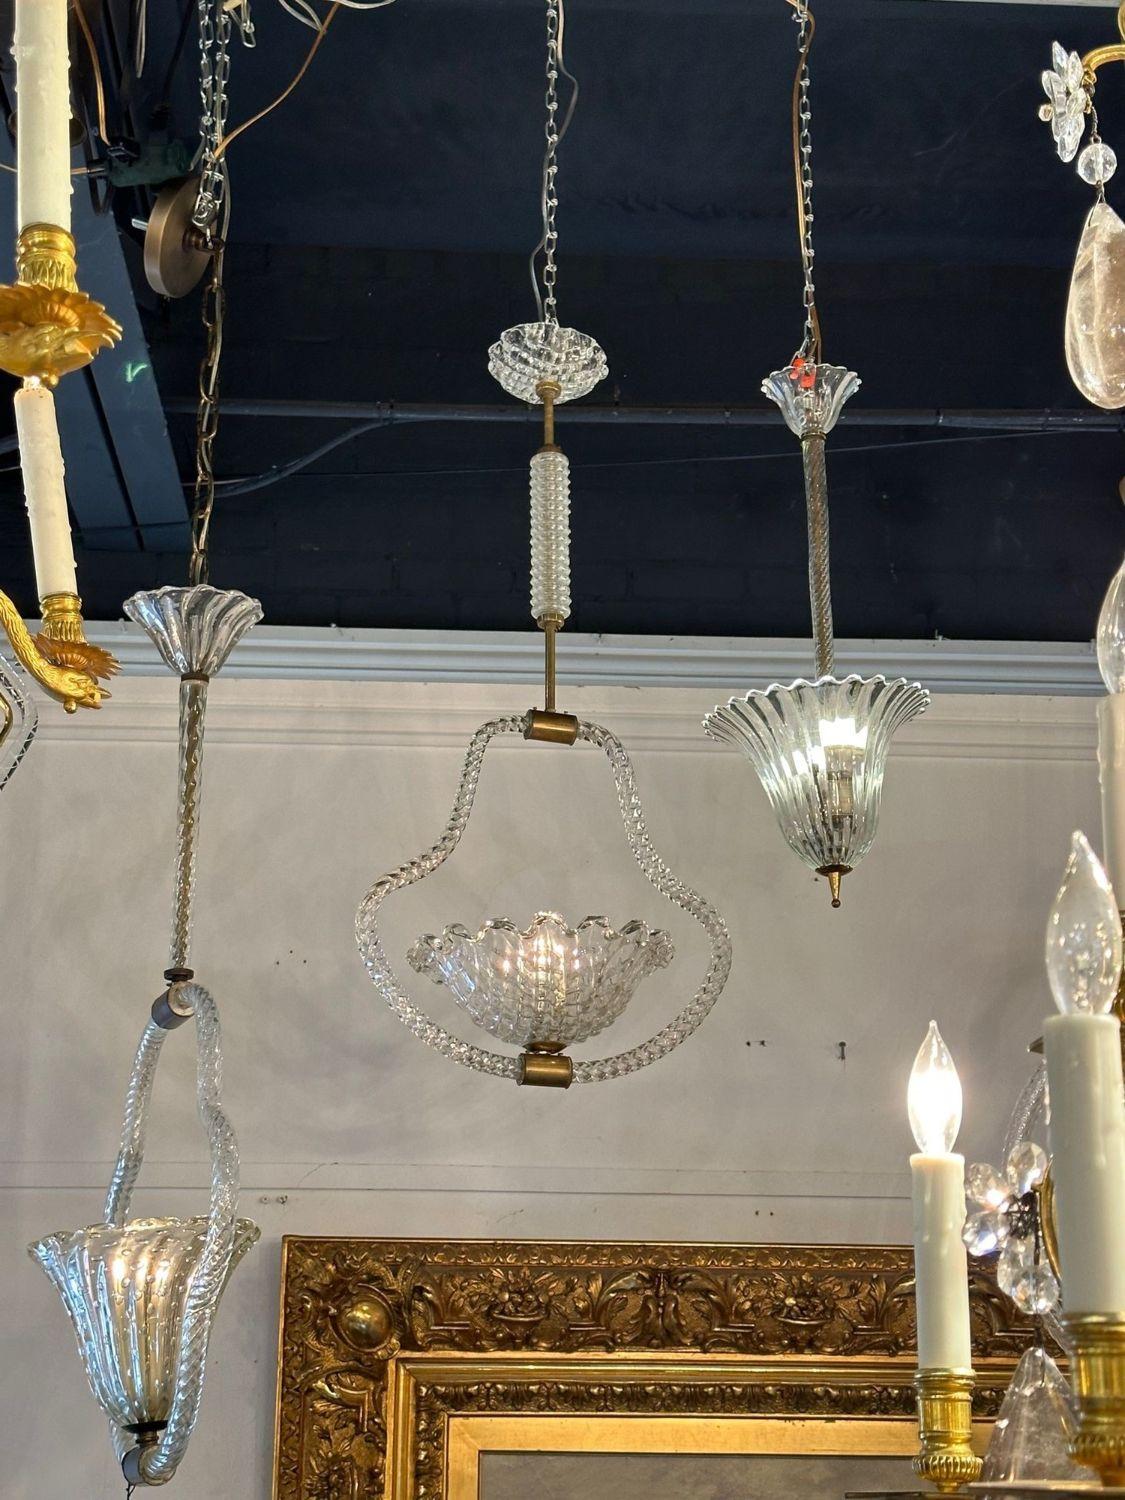 Vintage Italian Murano glass and brass pendant after Barovier. Circa 1960. The chandelier has been professionally re-wired, cleaned and is ready to hang.